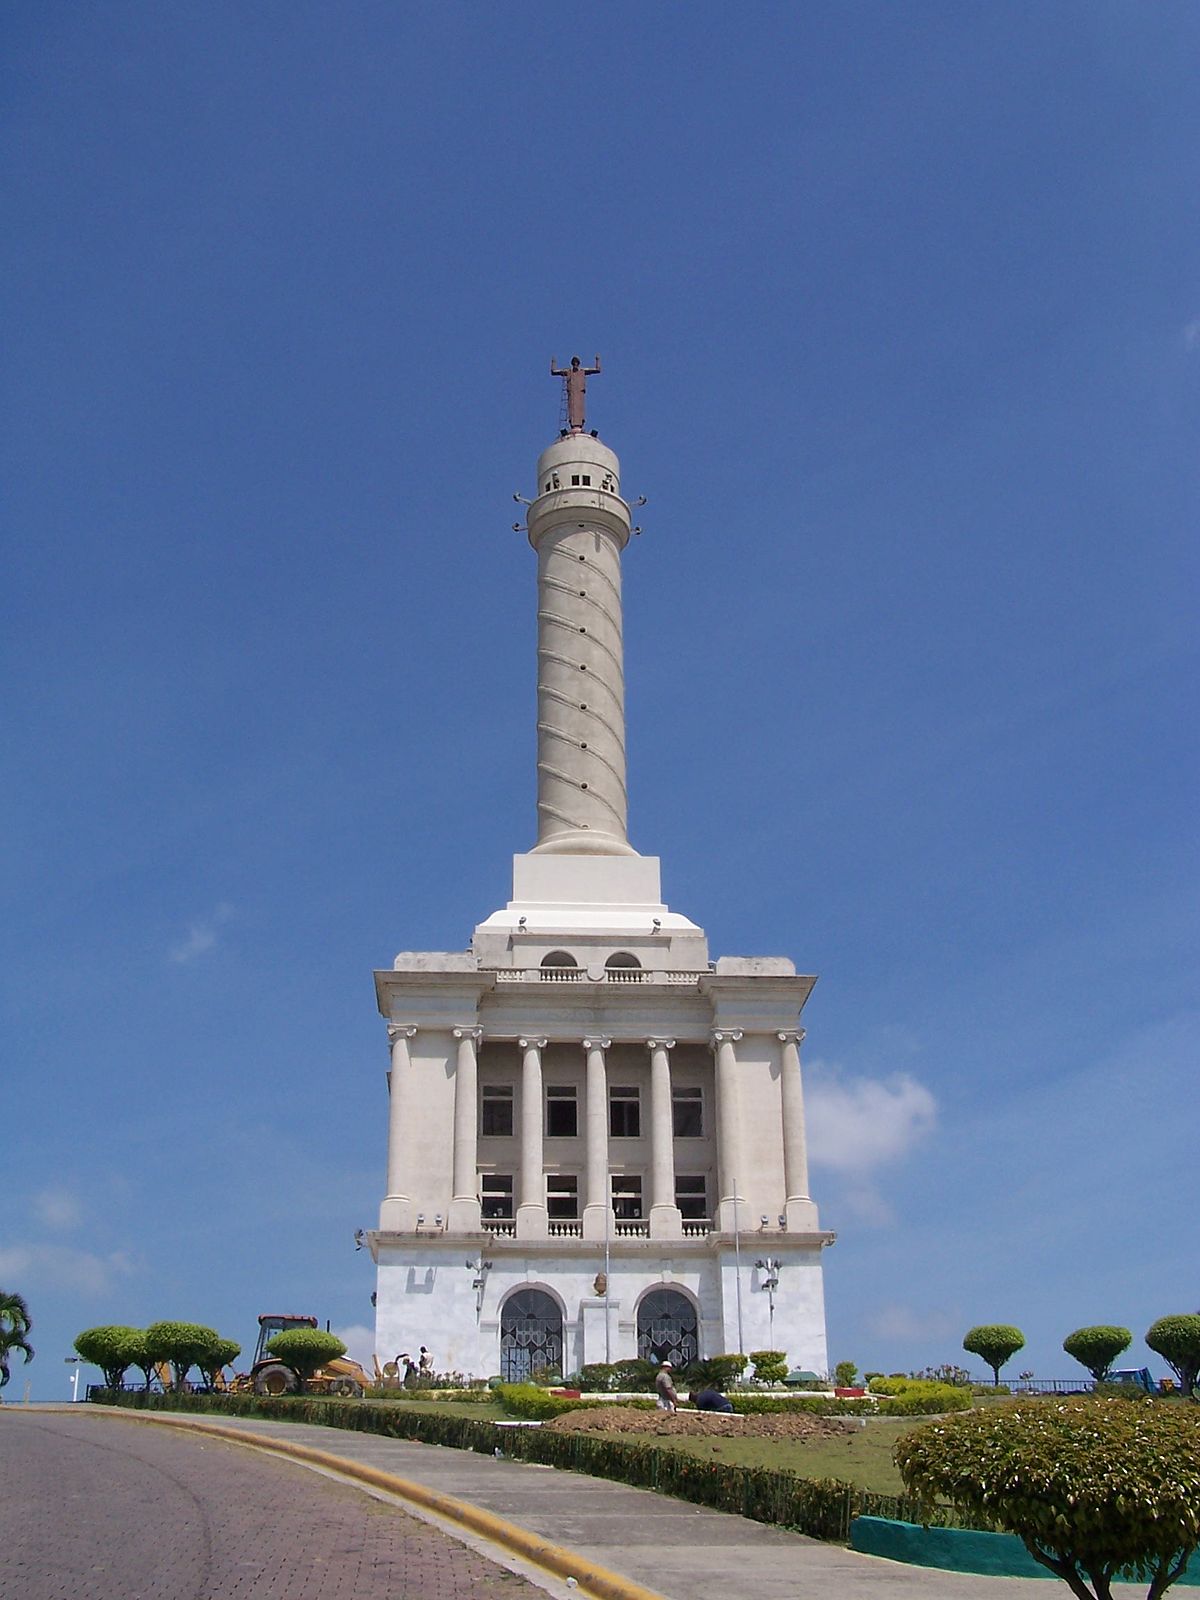 National monument of Dominican Republic - Monument to the Heroes of the Restoration